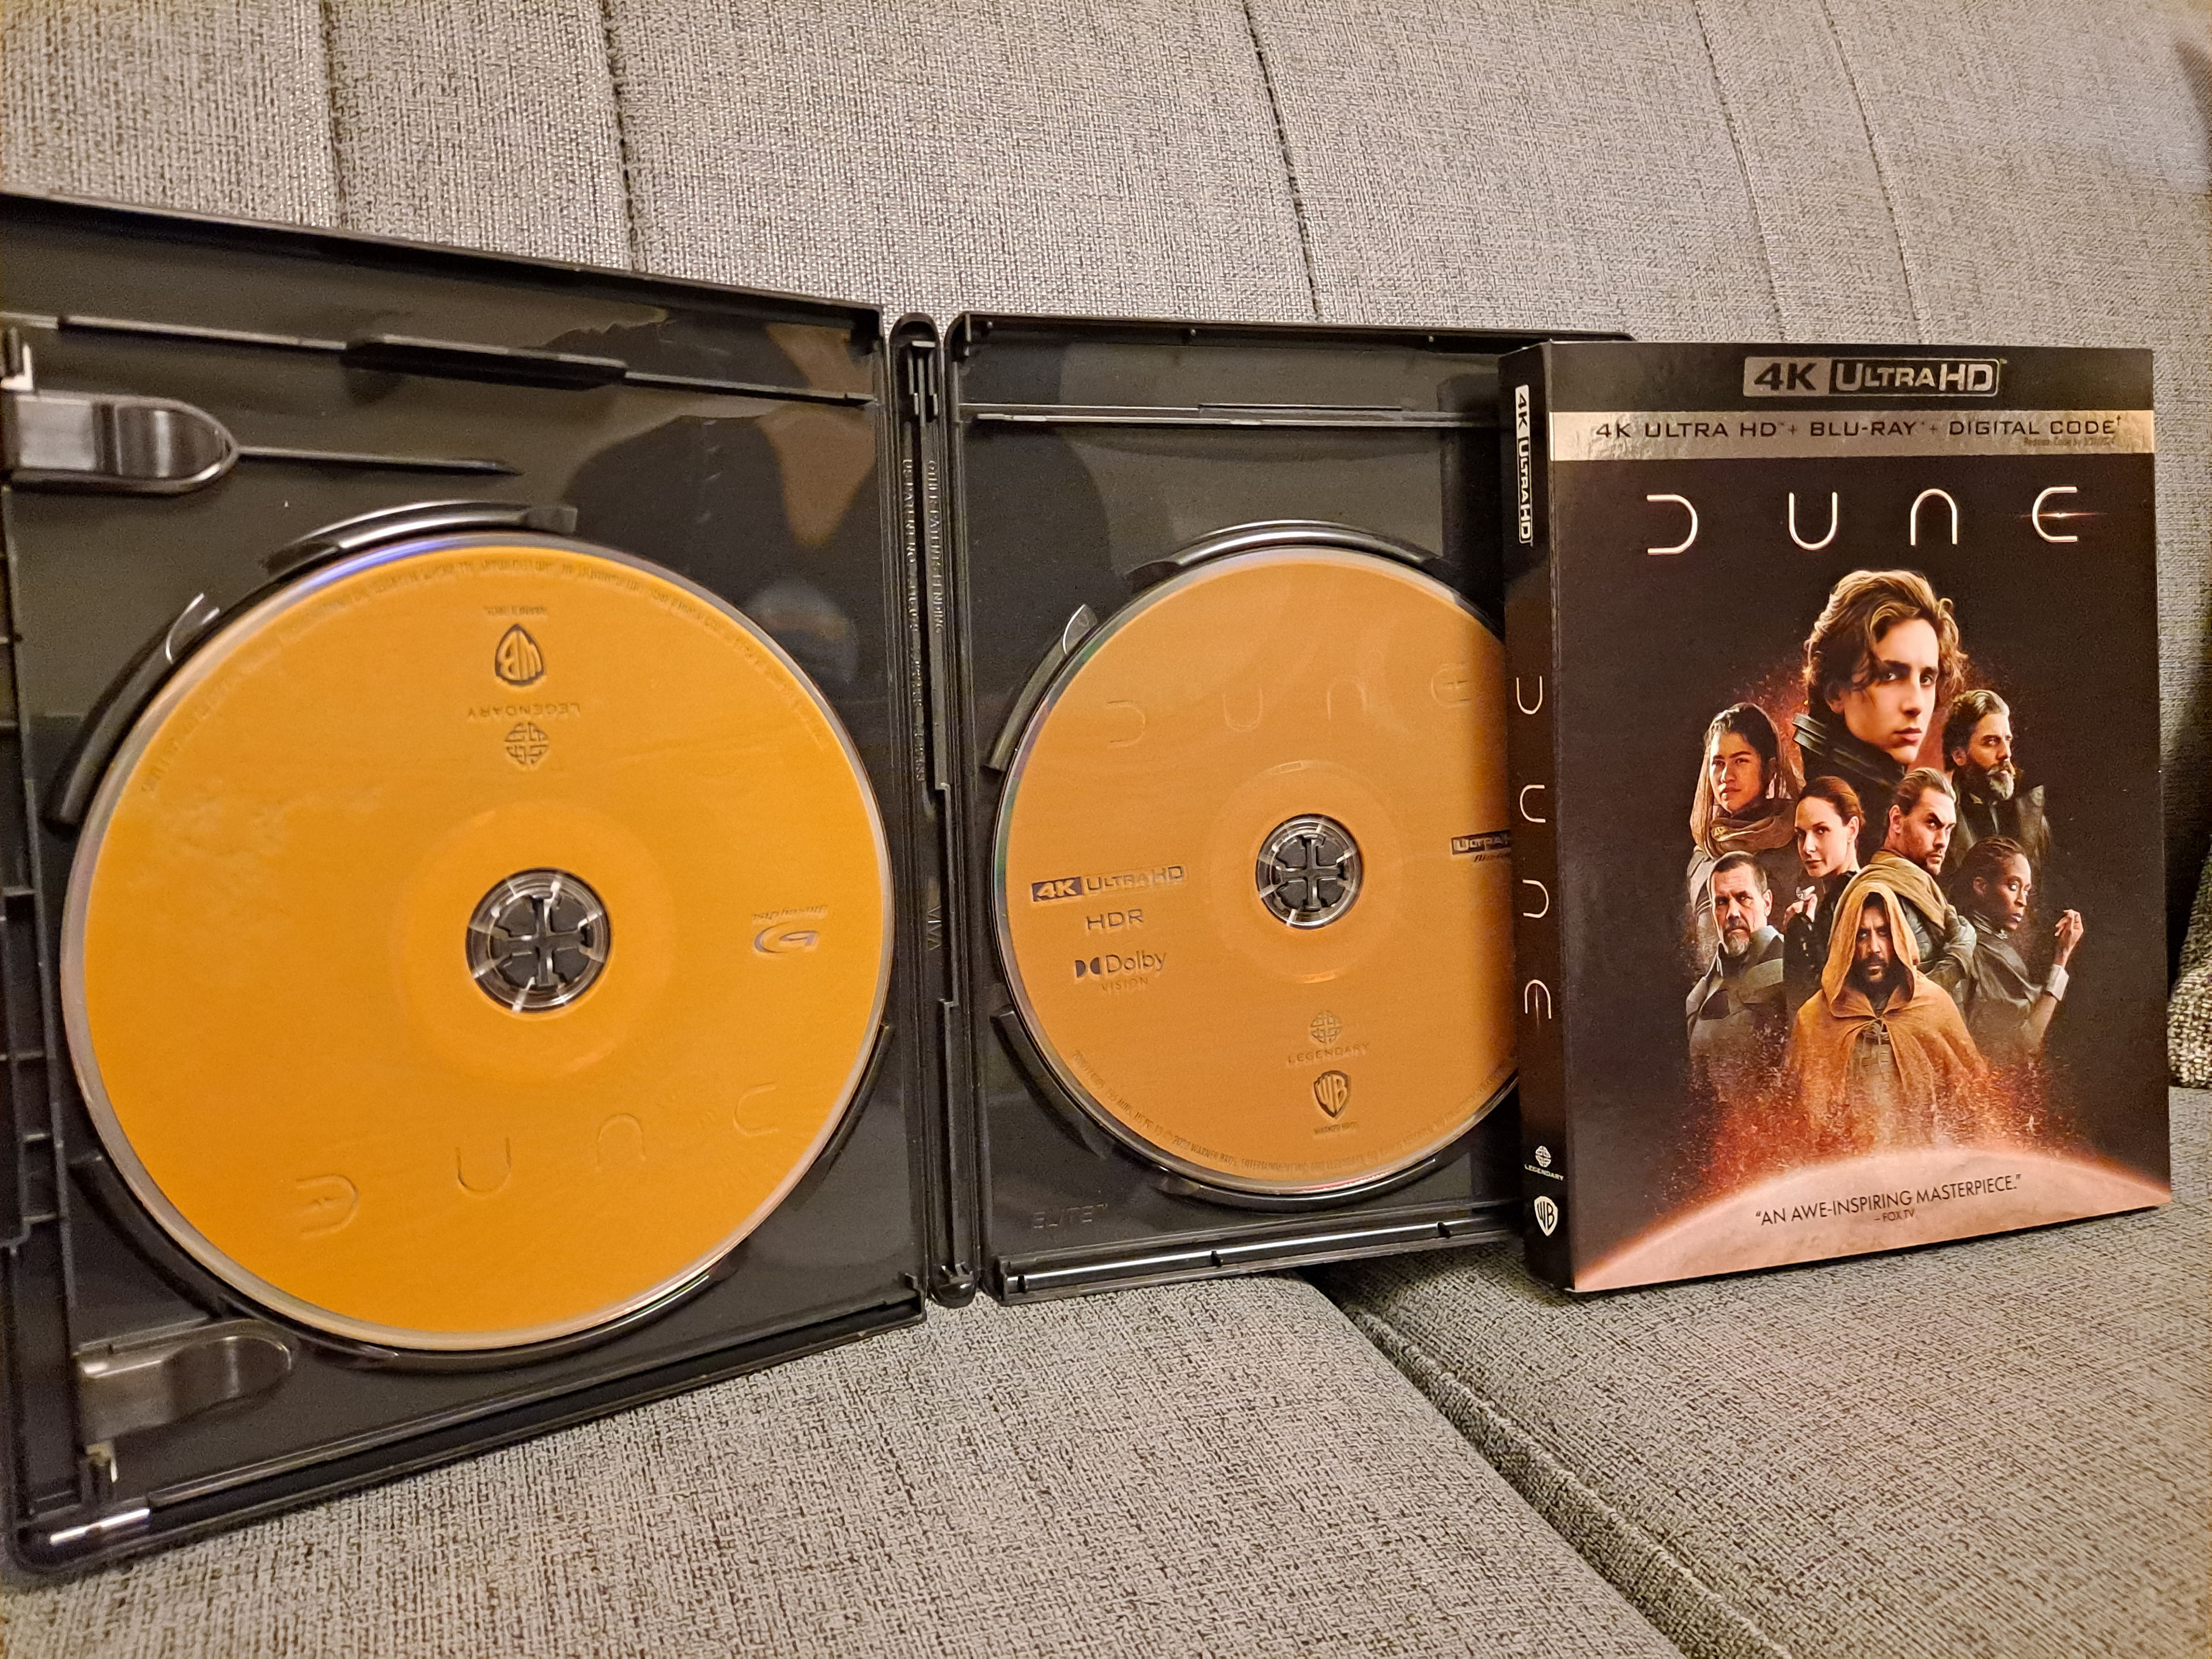 About the Blu-ray Disc - Hi-Res Edition